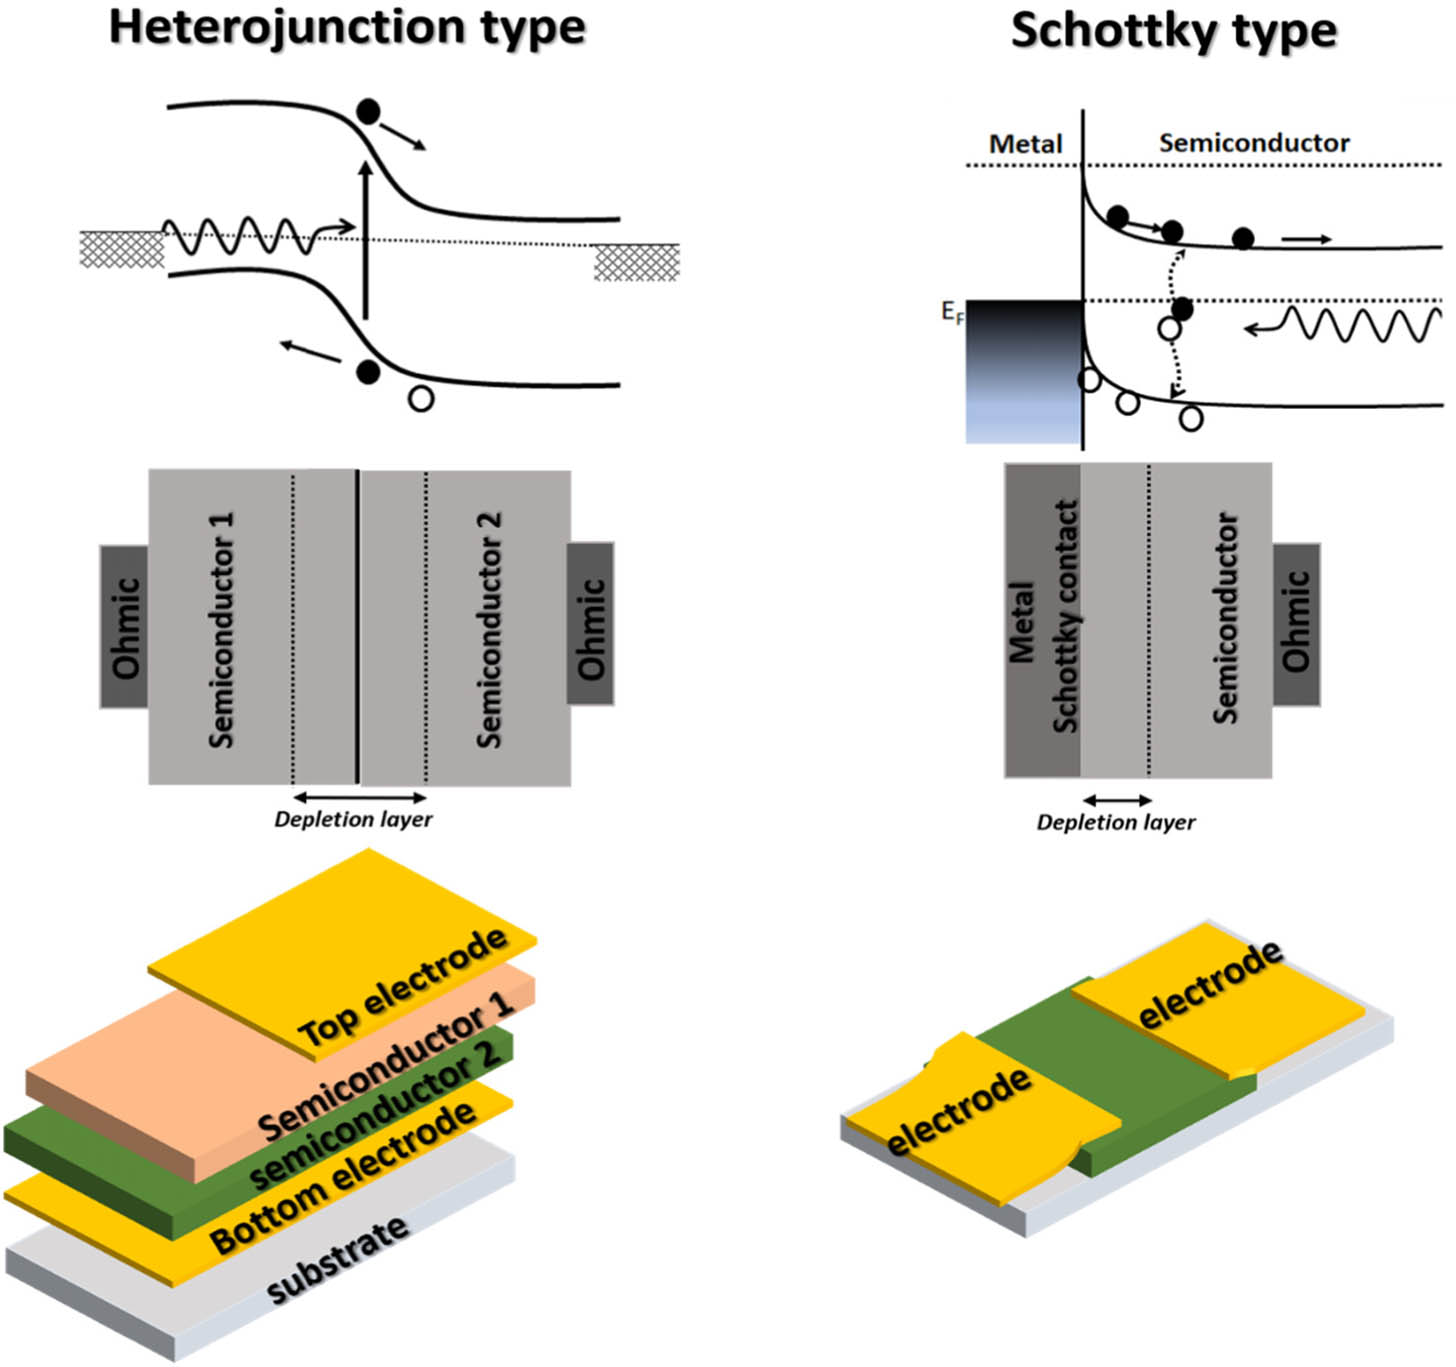 Schematic diagrams of working principle of SPPDs in PV mode: heterojunction type (left side) and Schottky type (right side).